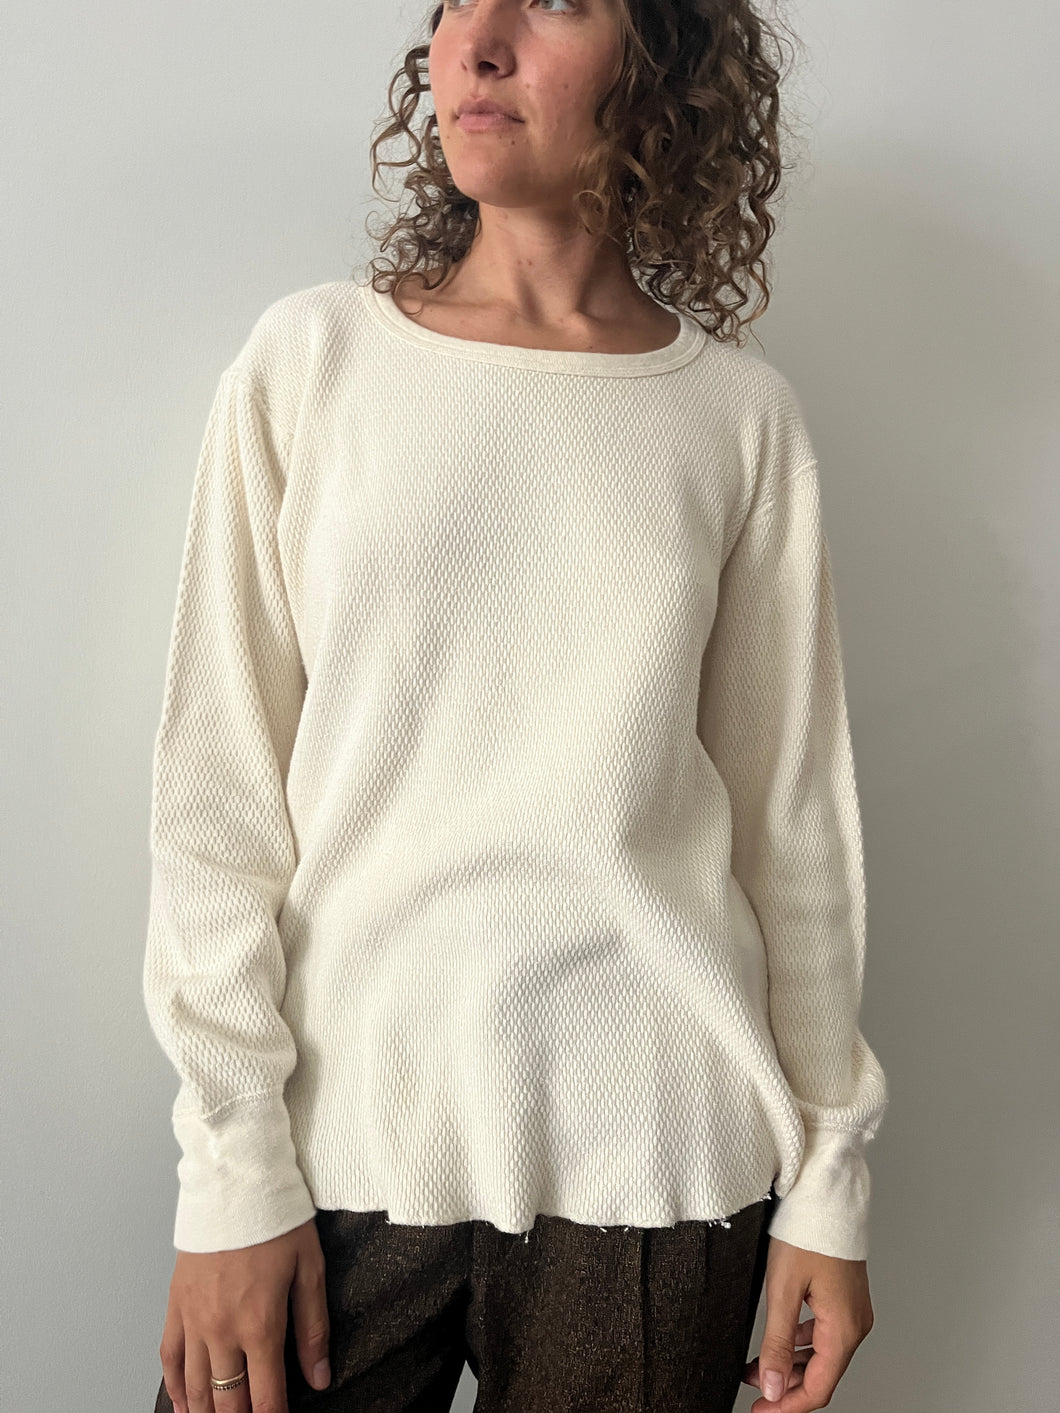 70s/80s Cotton Thermal Shirt